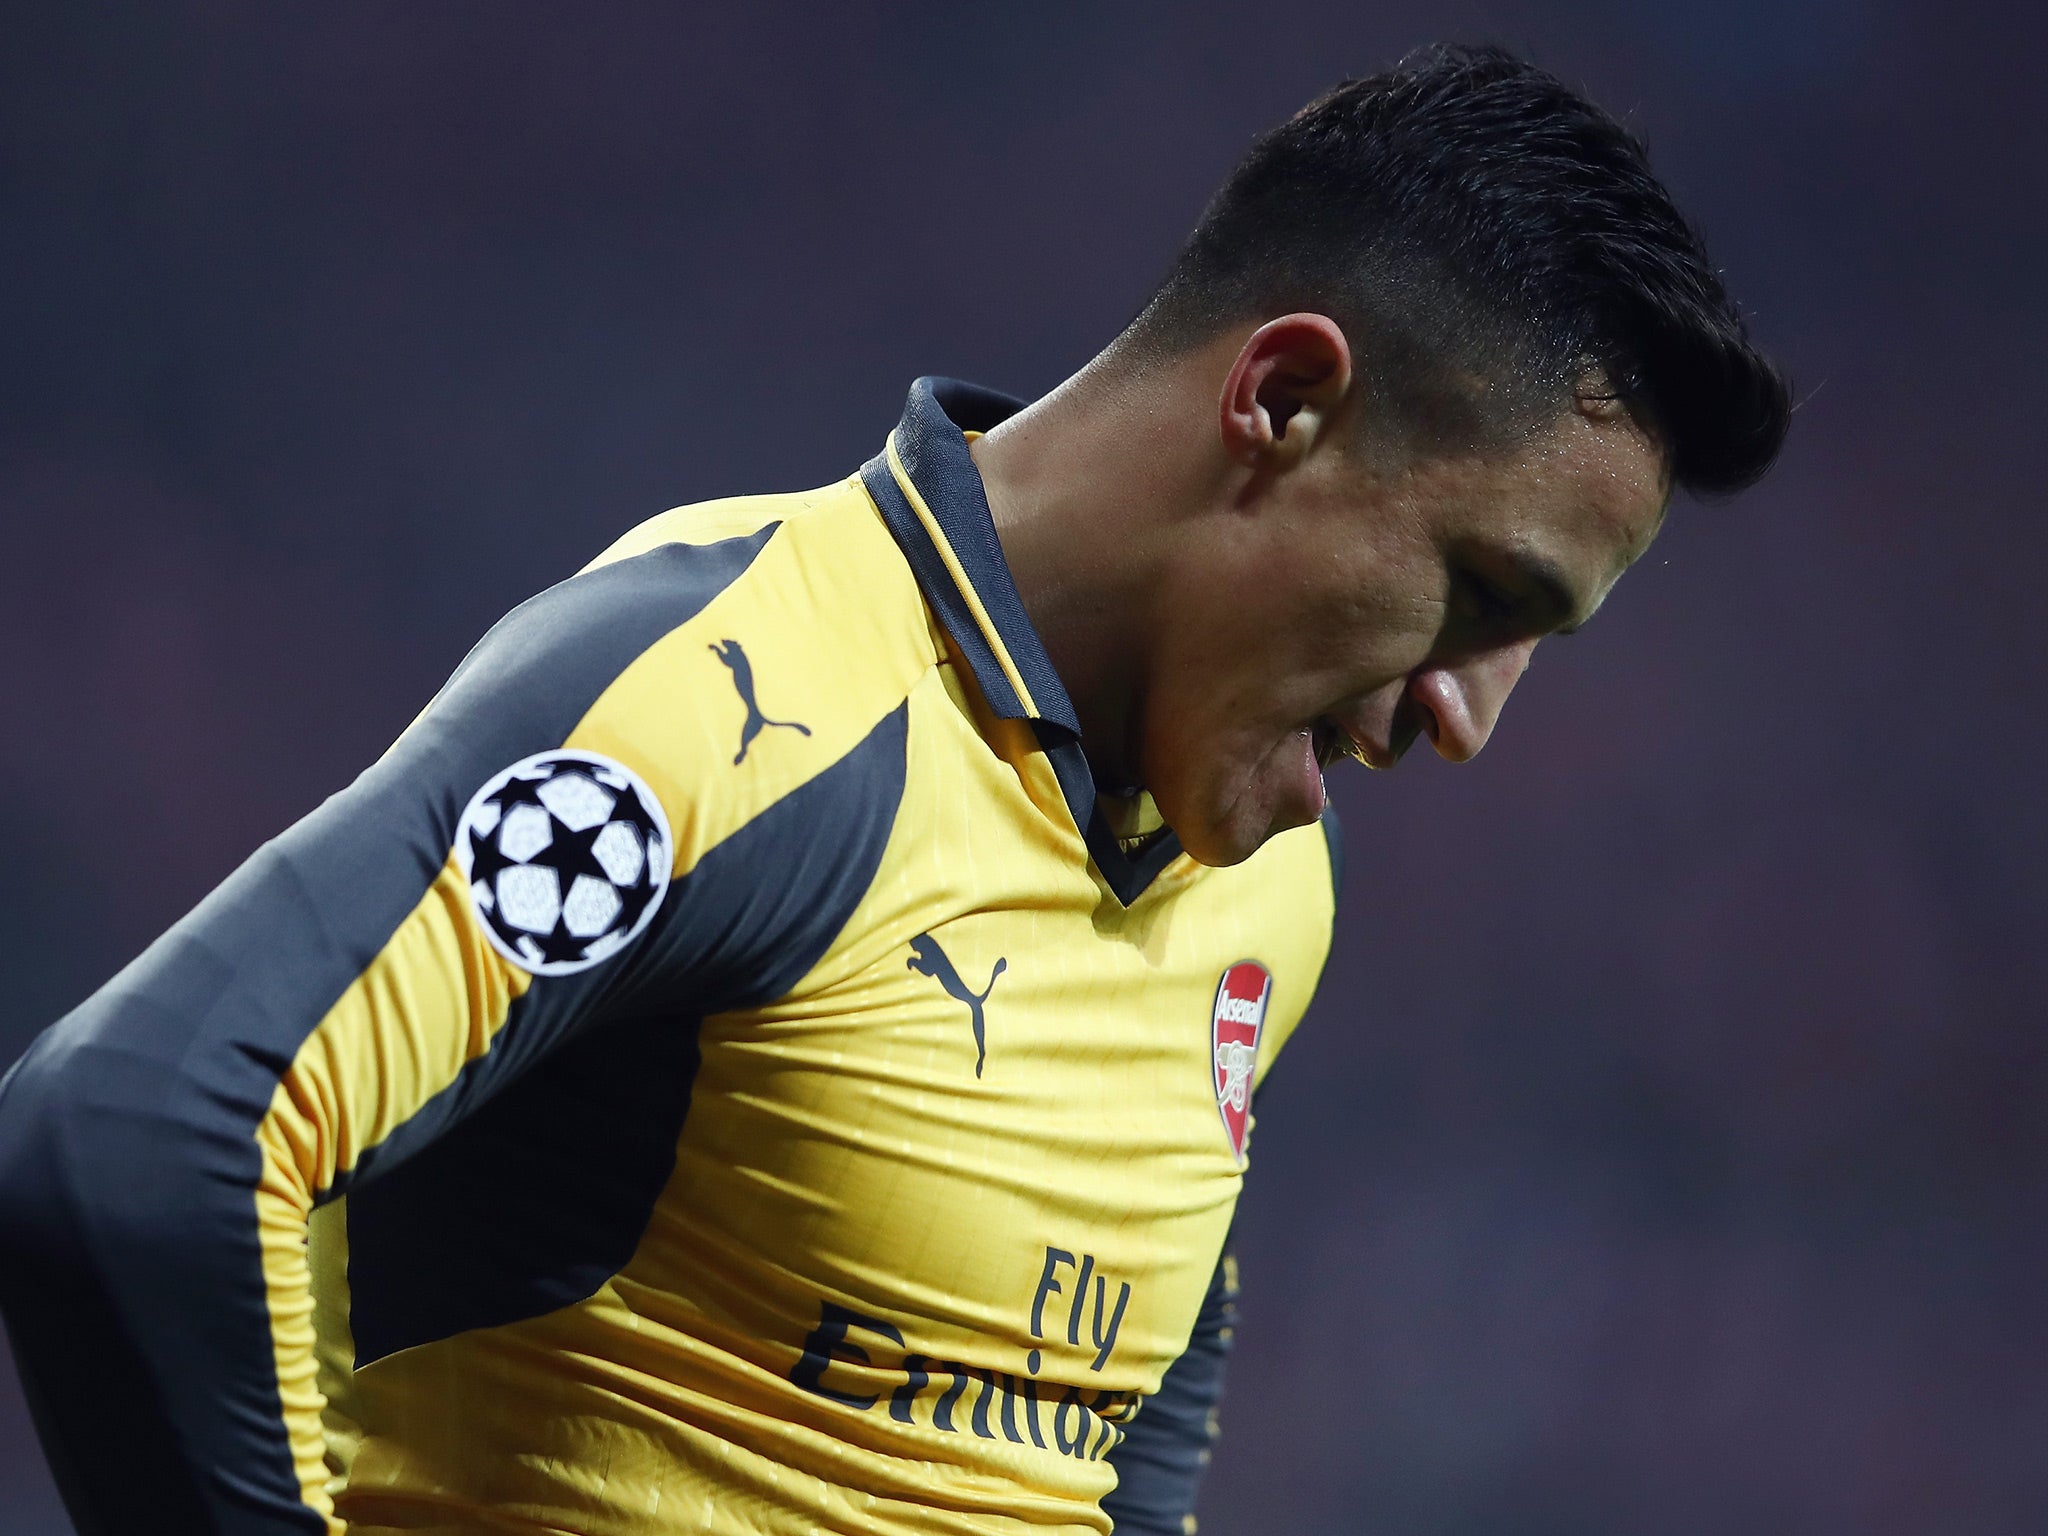 The protestors may yet get their wish, however, as Alexis Sanchez's future at Arsenal remains in doubt